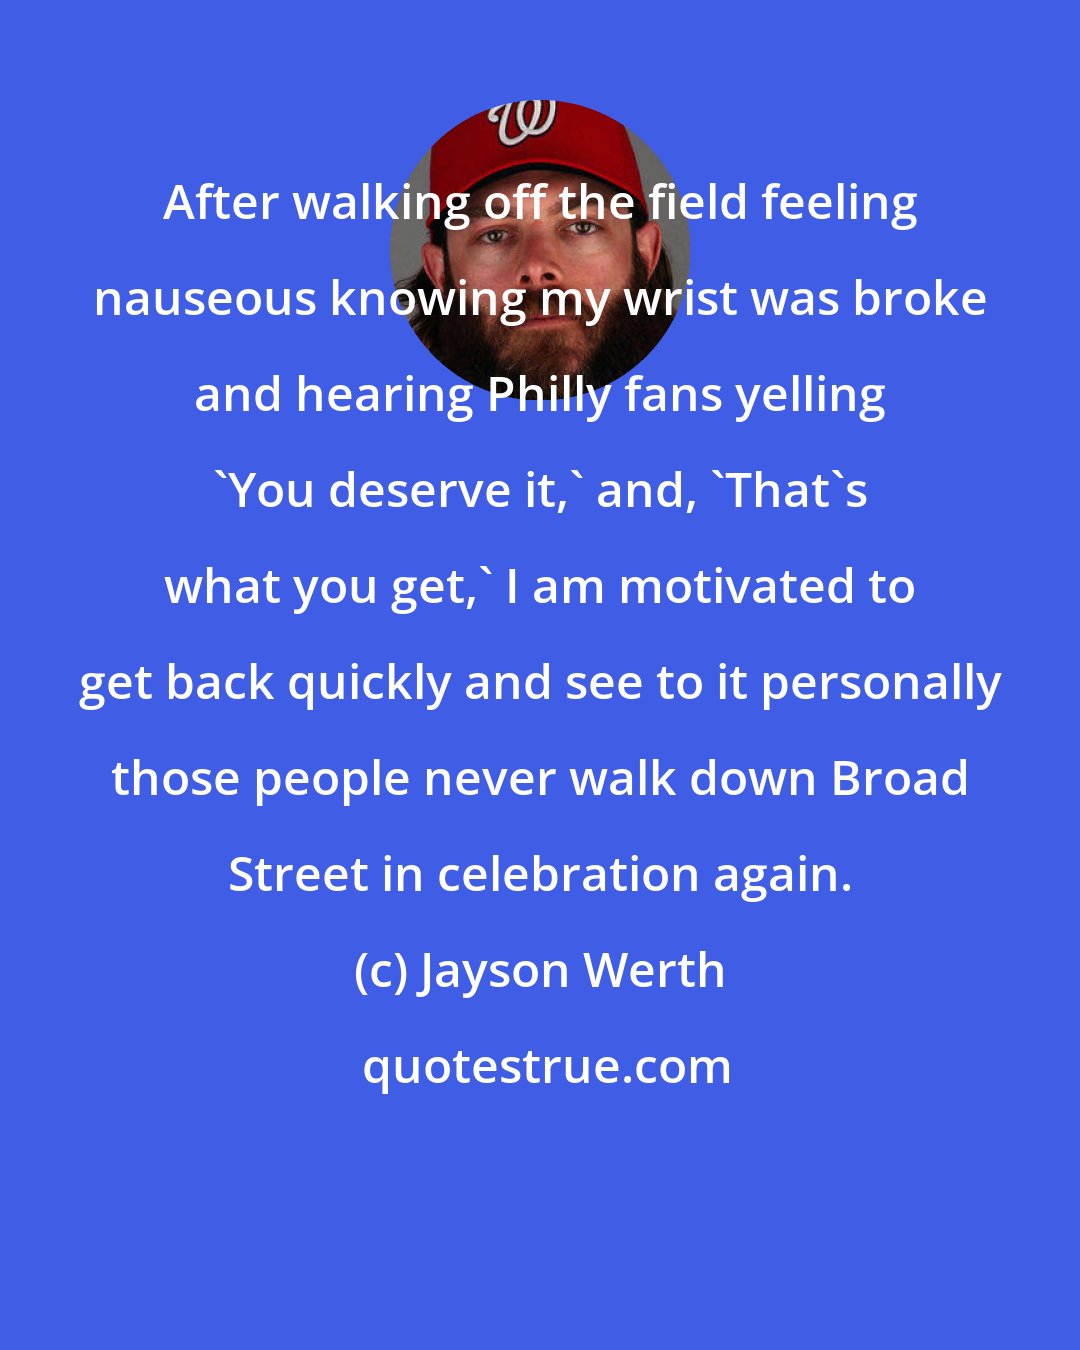 Jayson Werth: After walking off the field feeling nauseous knowing my wrist was broke and hearing Philly fans yelling 'You deserve it,' and, 'That's what you get,' I am motivated to get back quickly and see to it personally those people never walk down Broad Street in celebration again.